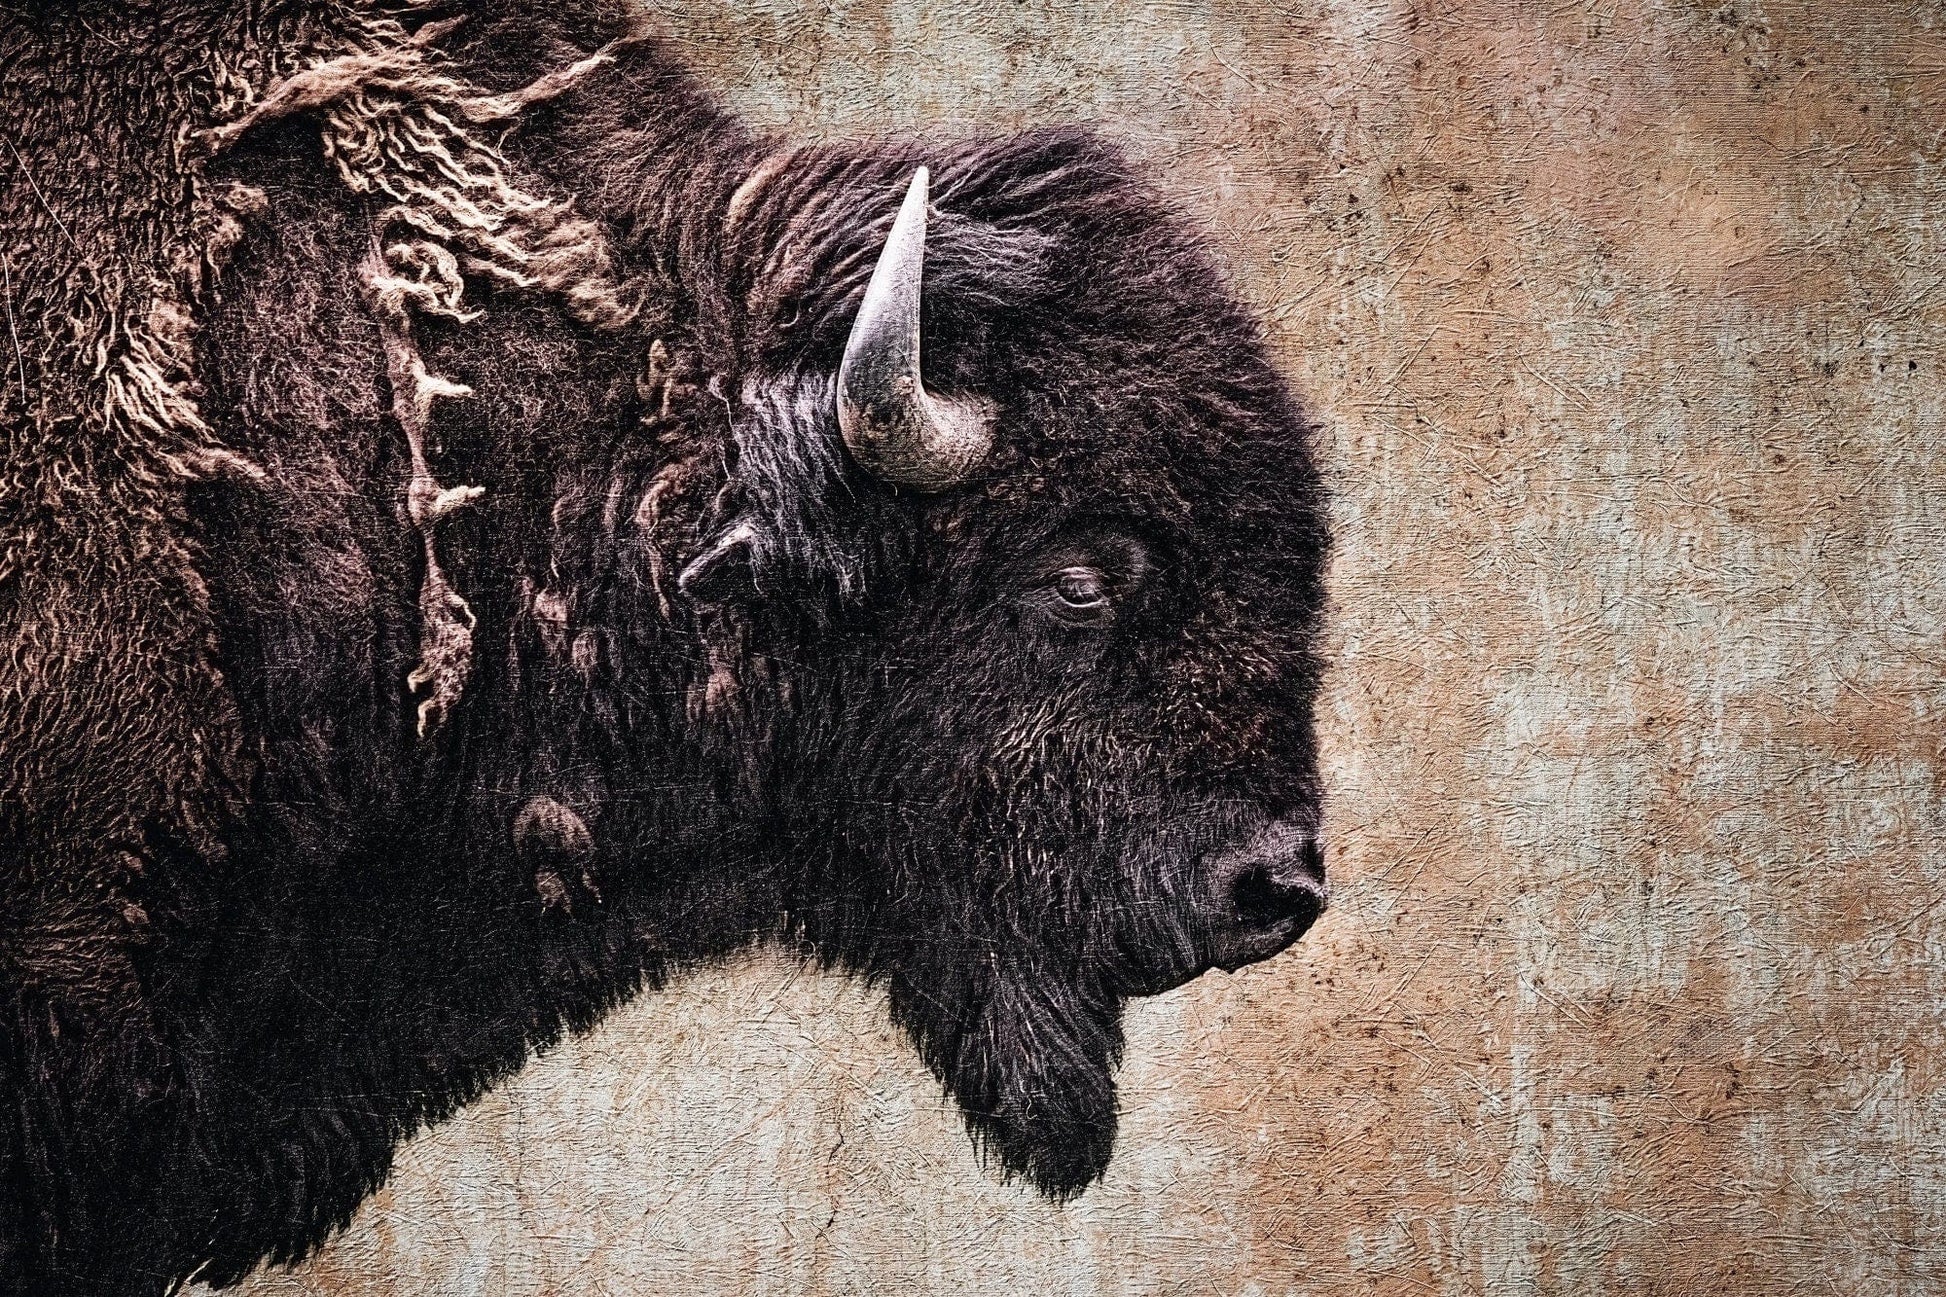 Teri James Photography Wall Art Paper Photo Print / 12 x 18 Inches Bison Painting Wall Art